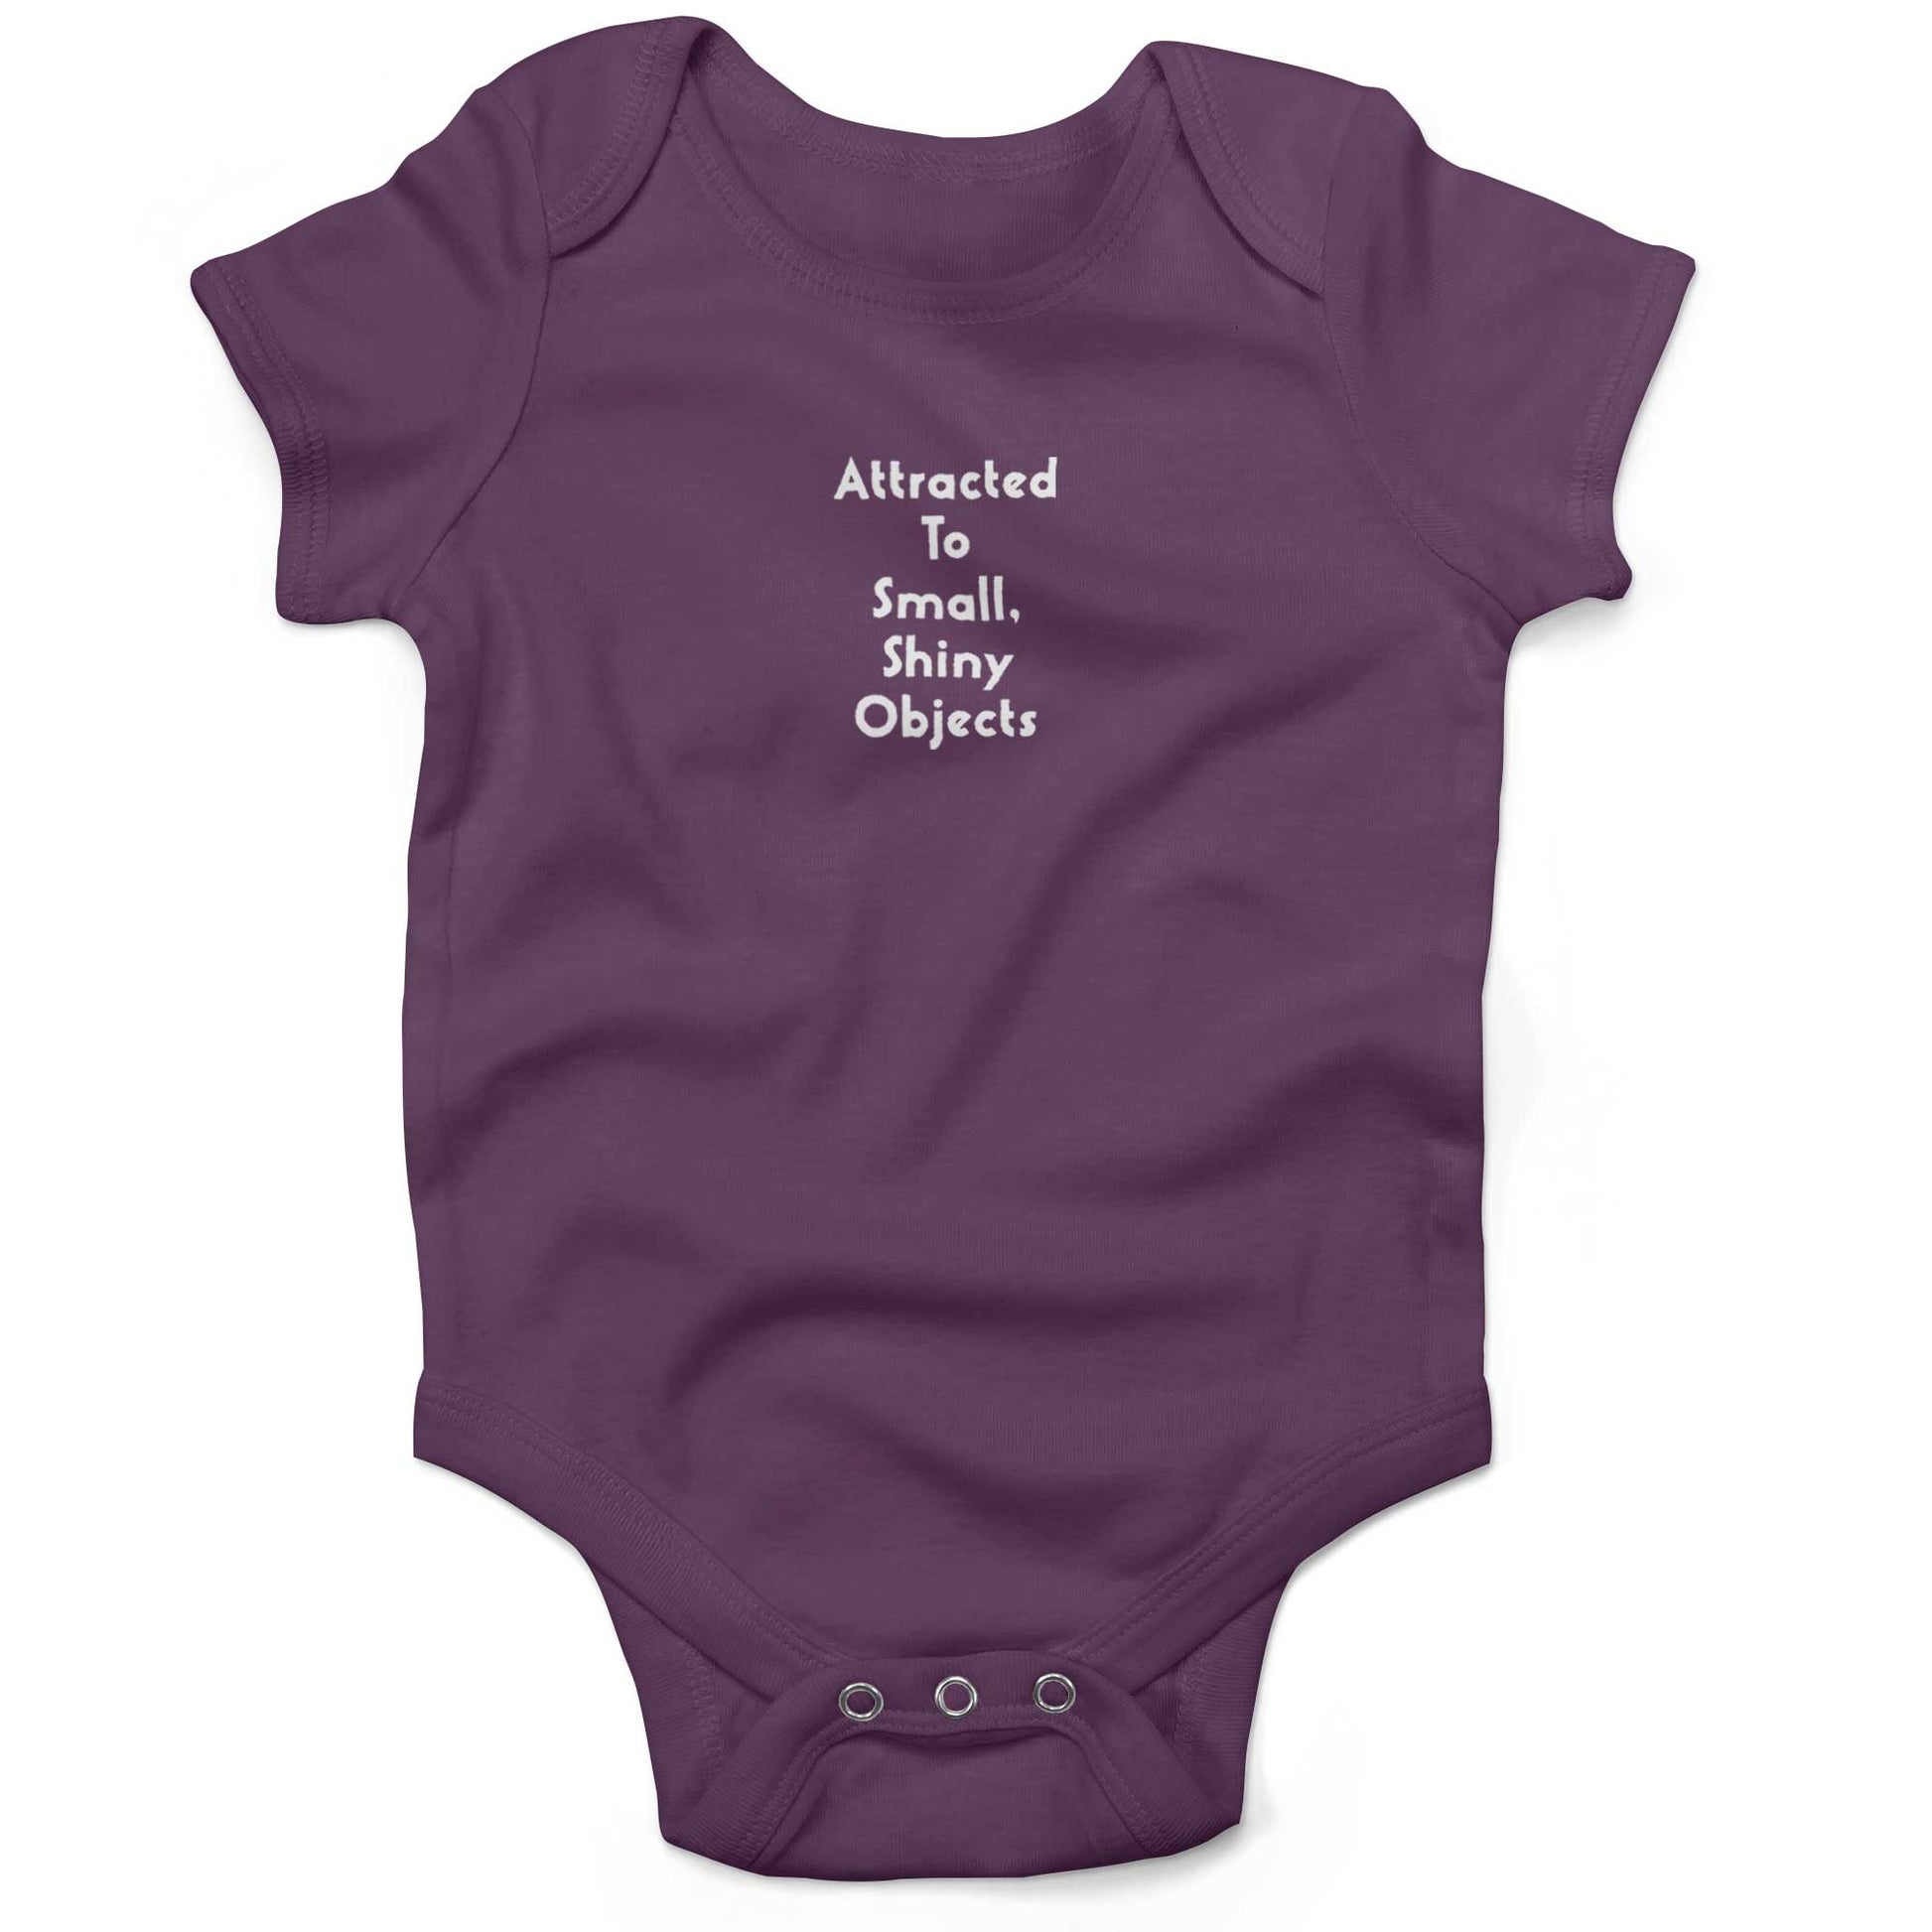 Attracted To Small, Shiny Objects Baby One Piece-Organic Purple-3-6 months